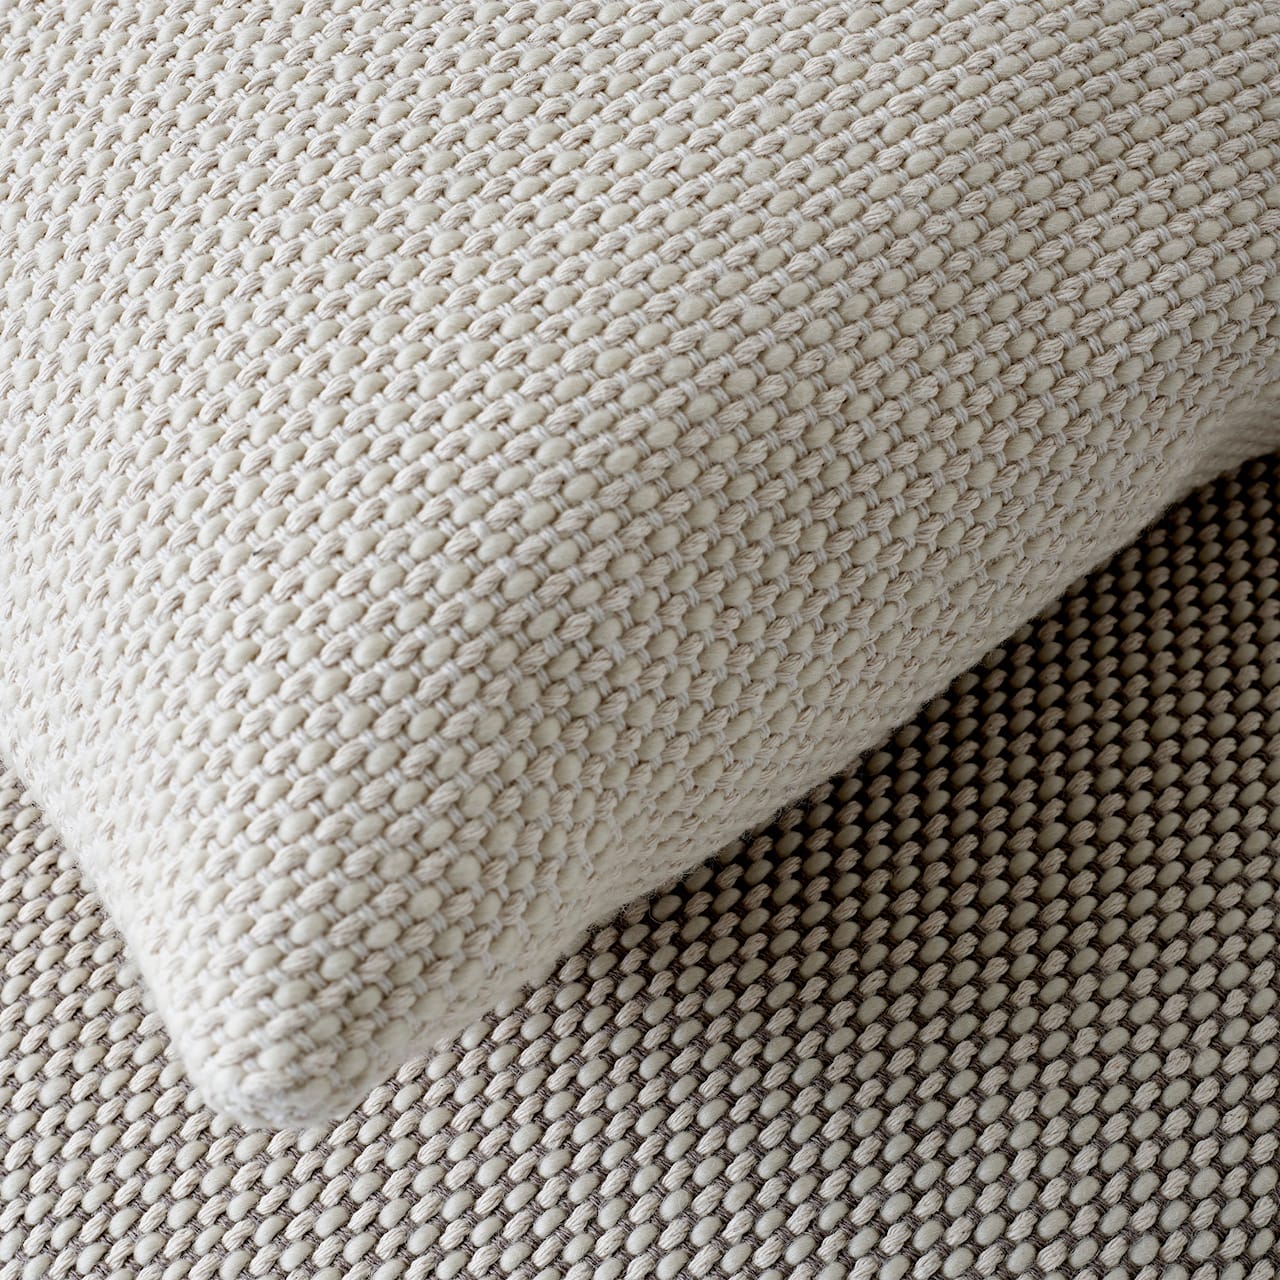 Collect Cushion SC48 Weave